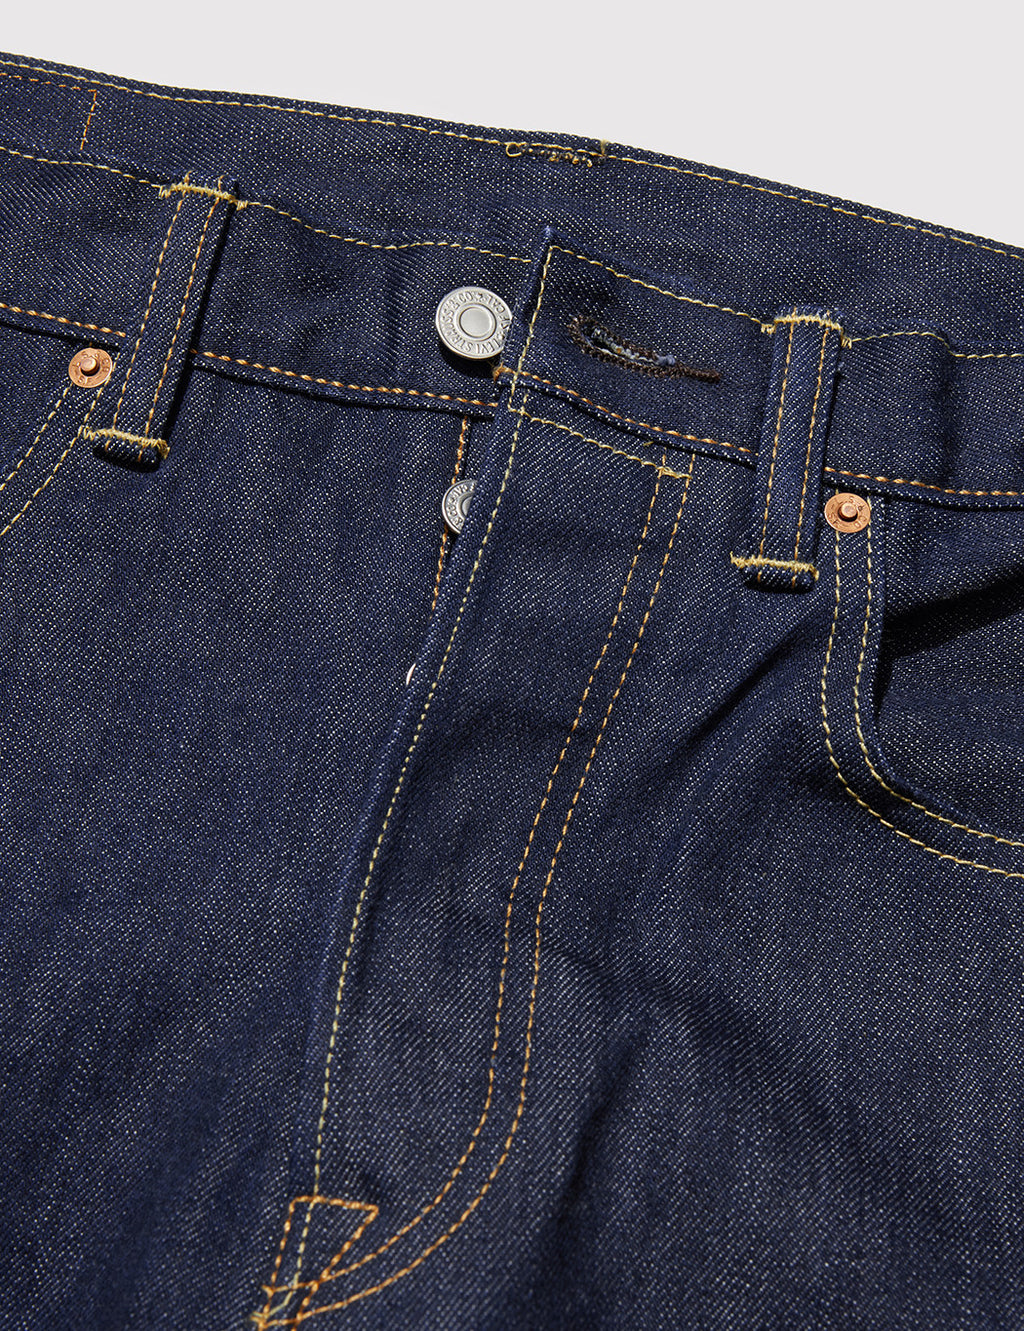 Levis 501 CT Customised Tapered Jeans - Celebration | URBAN EXCESS.